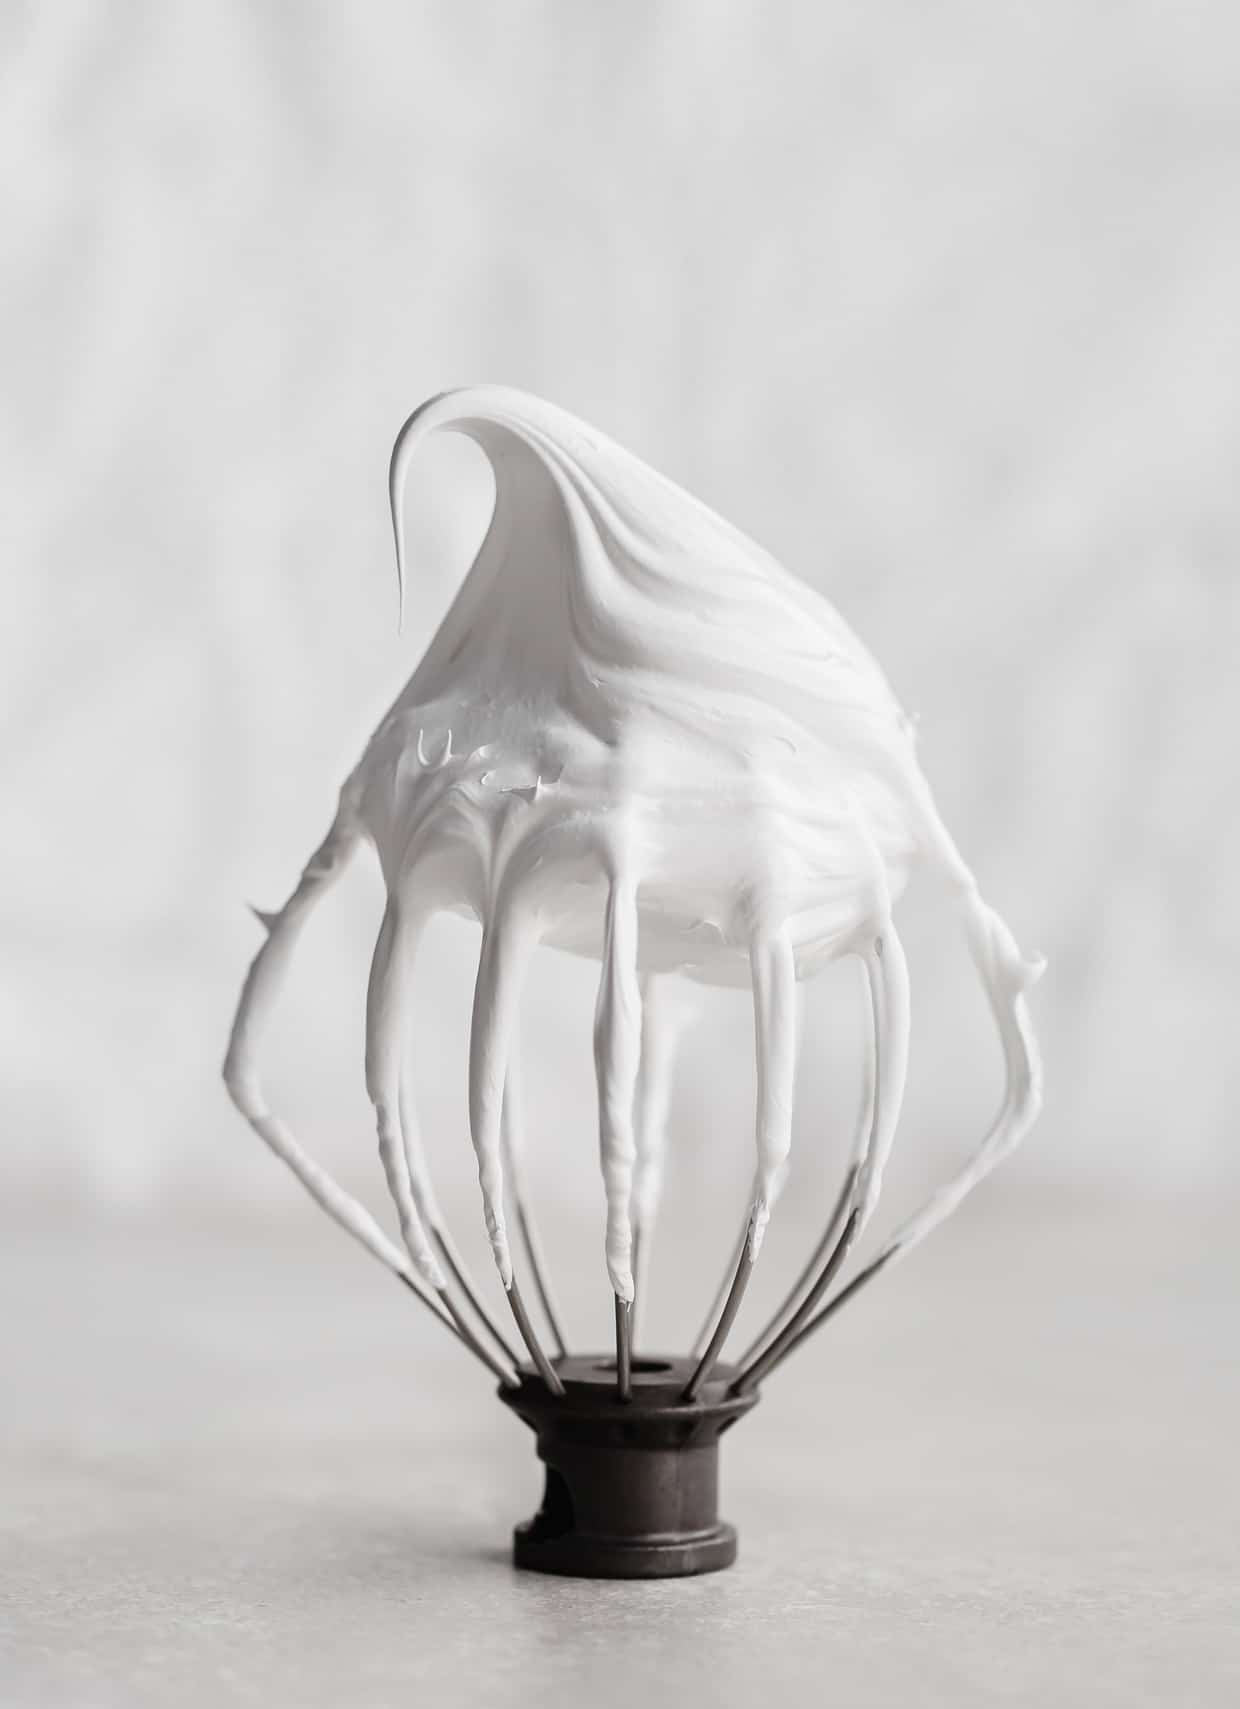 A whisk attachment with a billowy white Swiss meringue on it.